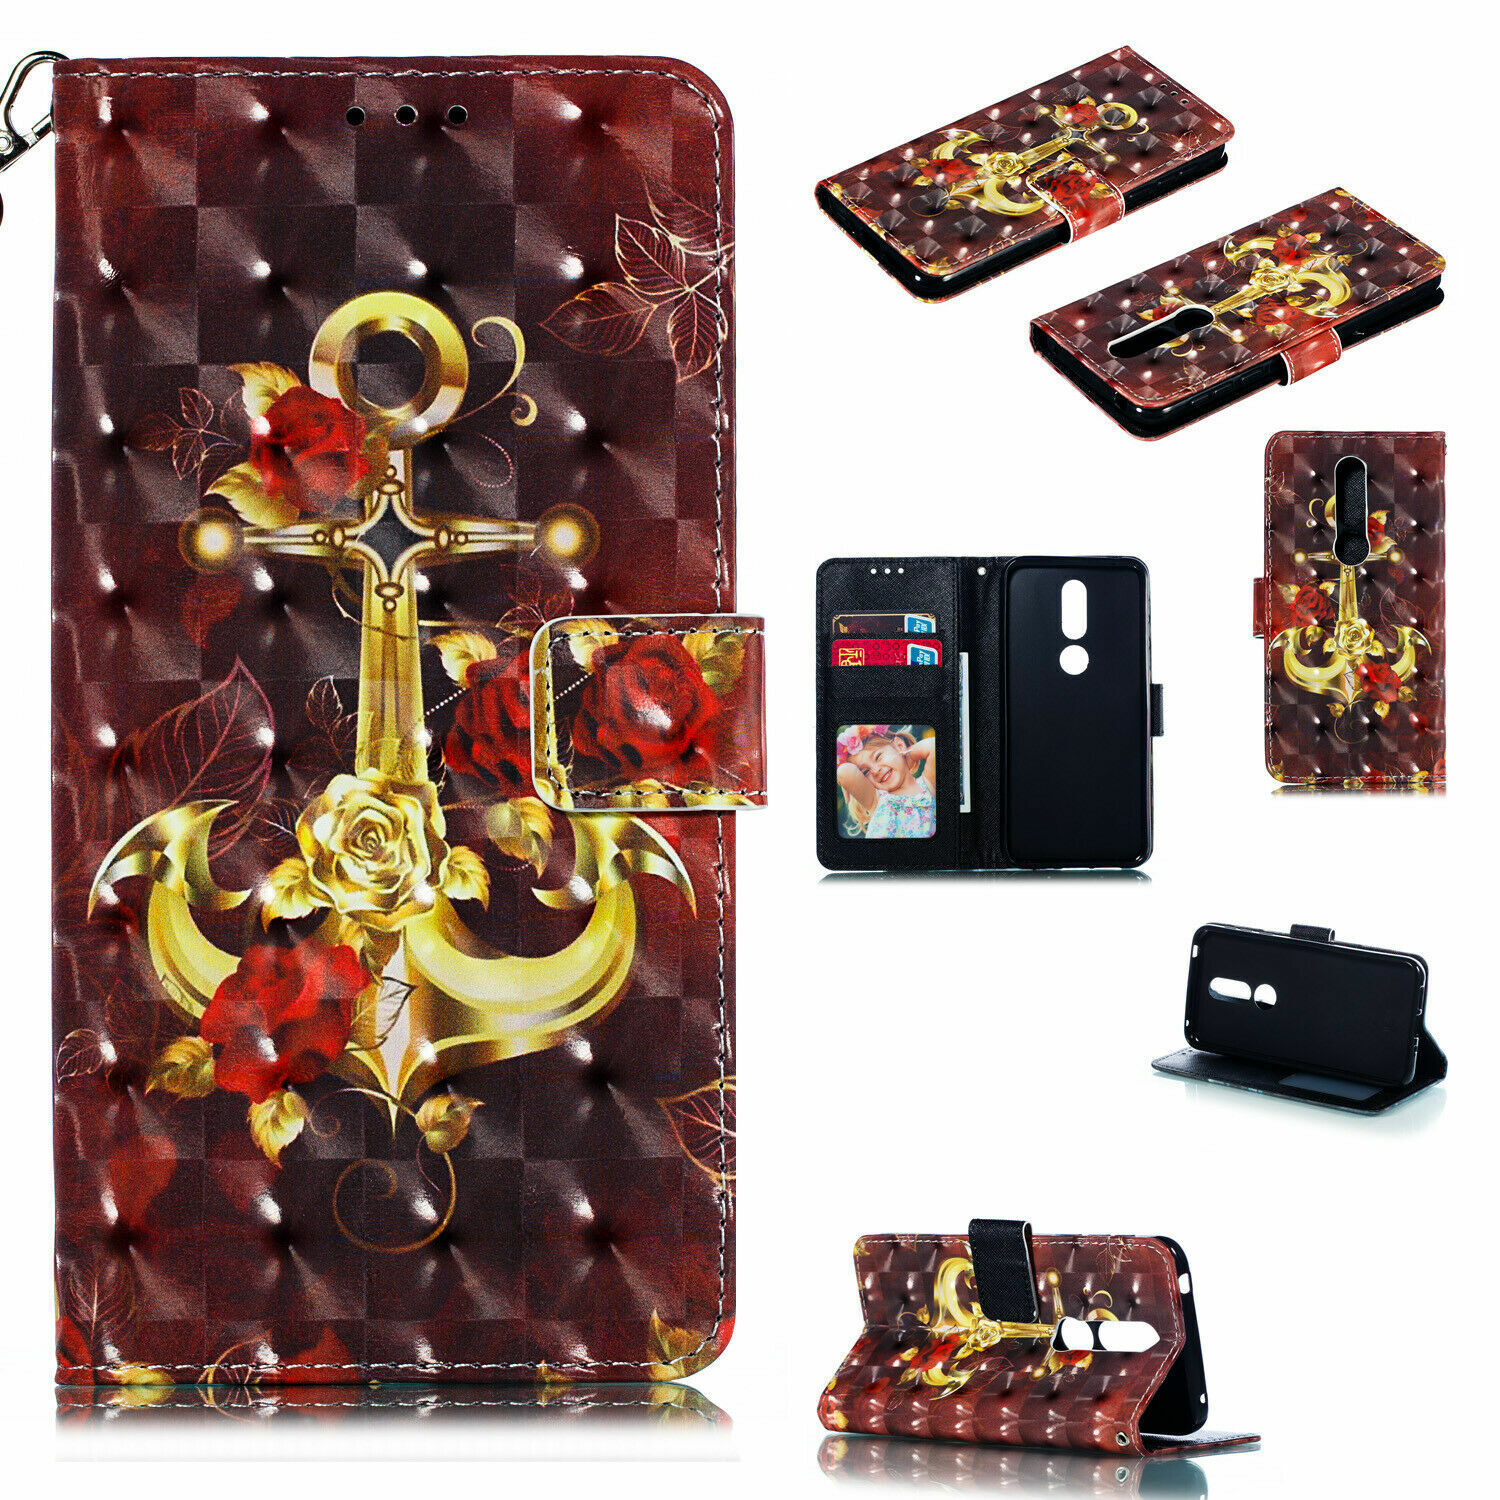 For Nokia 8.1 5.1 3.1 Plus 7.1 6.1 2.1 Patterned Leather Wallet Stand Case Cover Ograniczona ilość, nowa praca